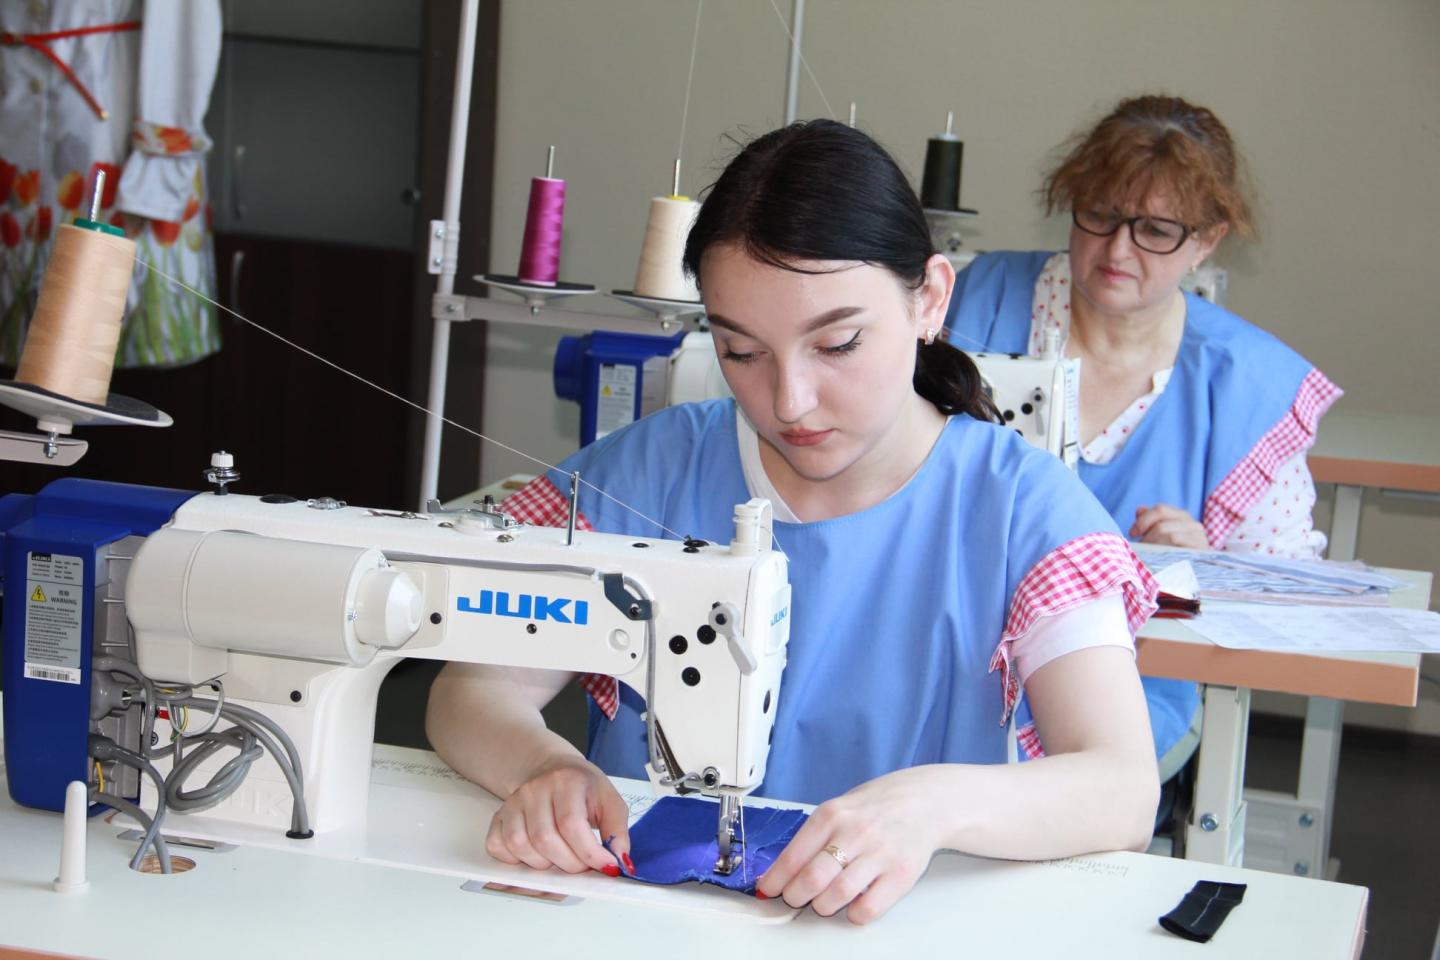 Practical part of technical and vocational training in Kharkiv region, SEW Ukraine Project. Photo credit - (7) Kharkiv Technical and Vocational Education Center of the State Emp